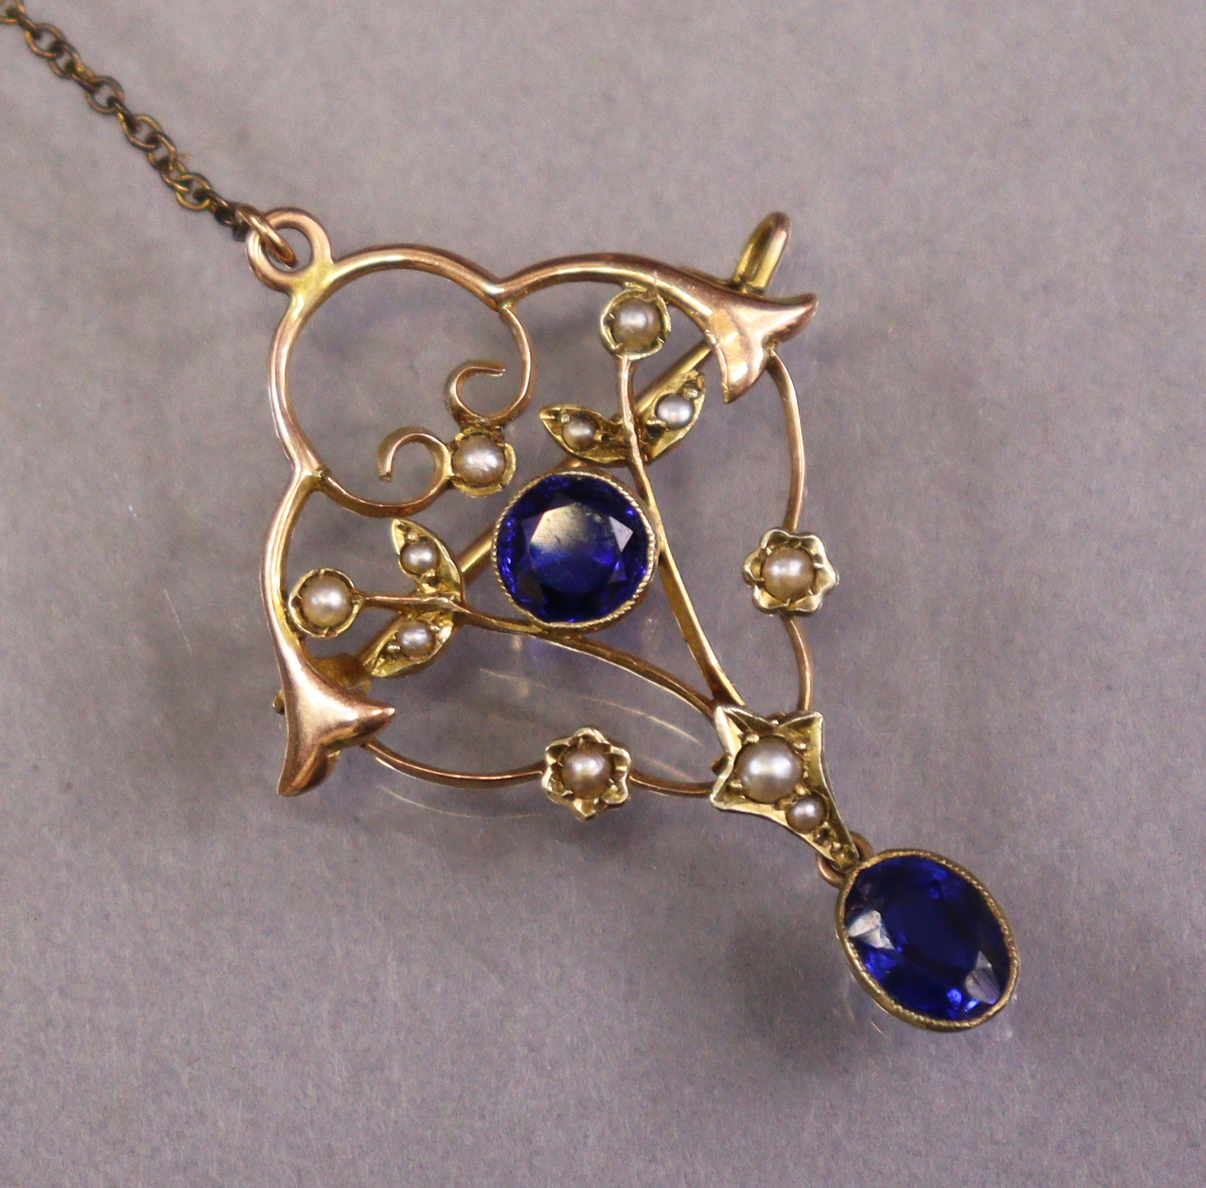 An early 20th century 9ct gold openwork brooch set round-cut sapphire & seed pearls, an oval-cut